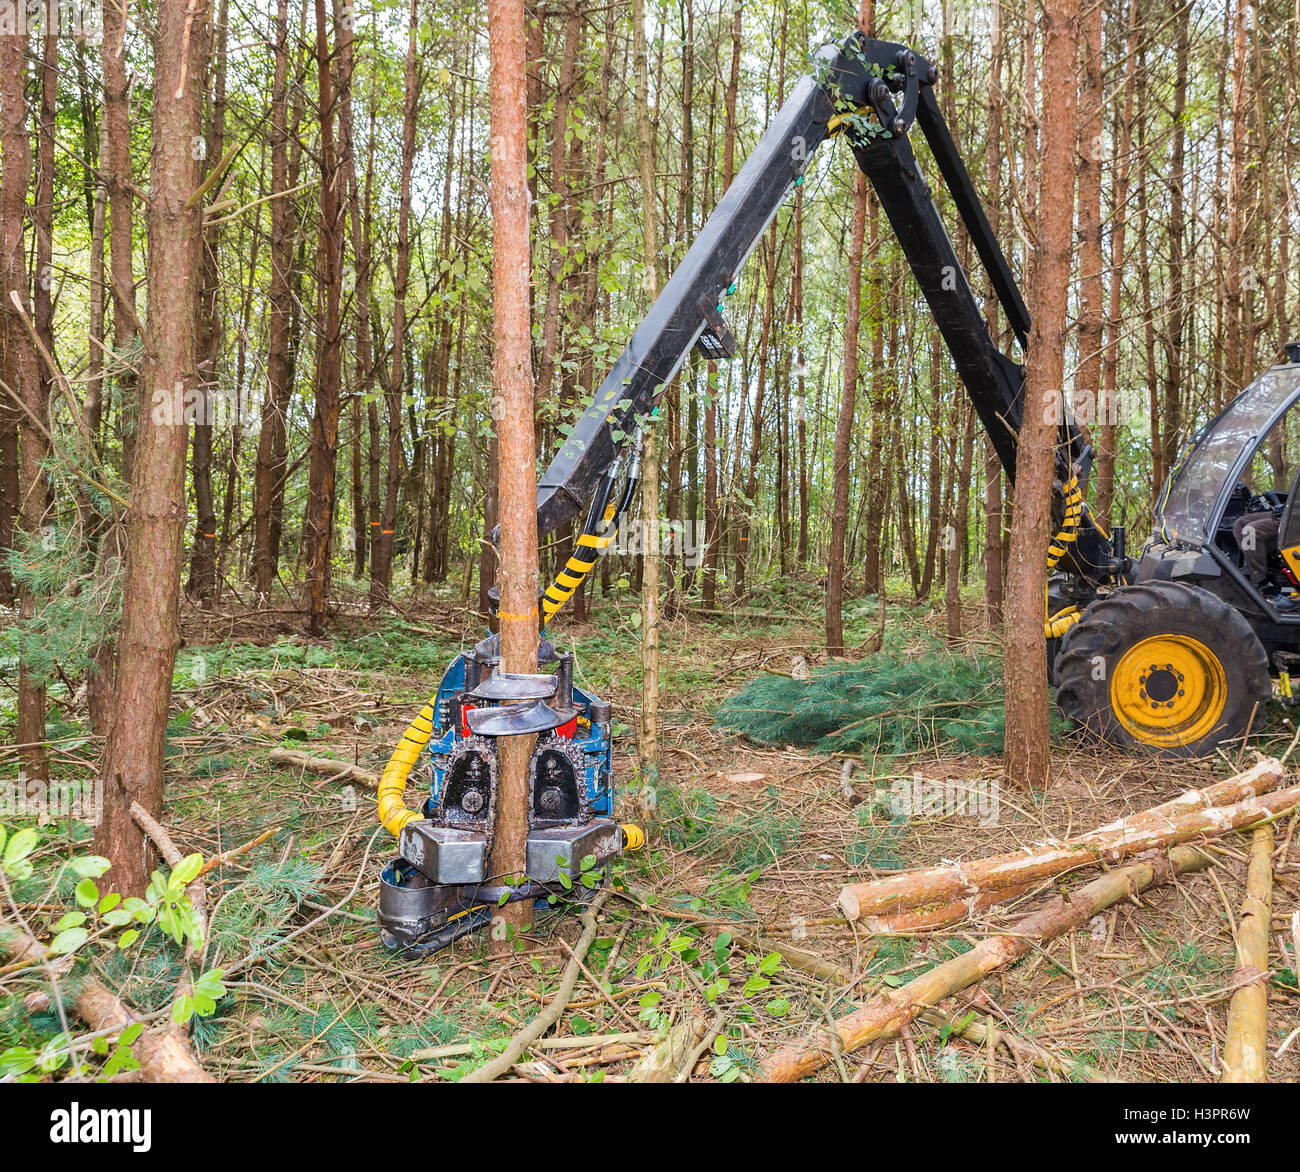 Machine sawing pine trees in forest Stock Photo